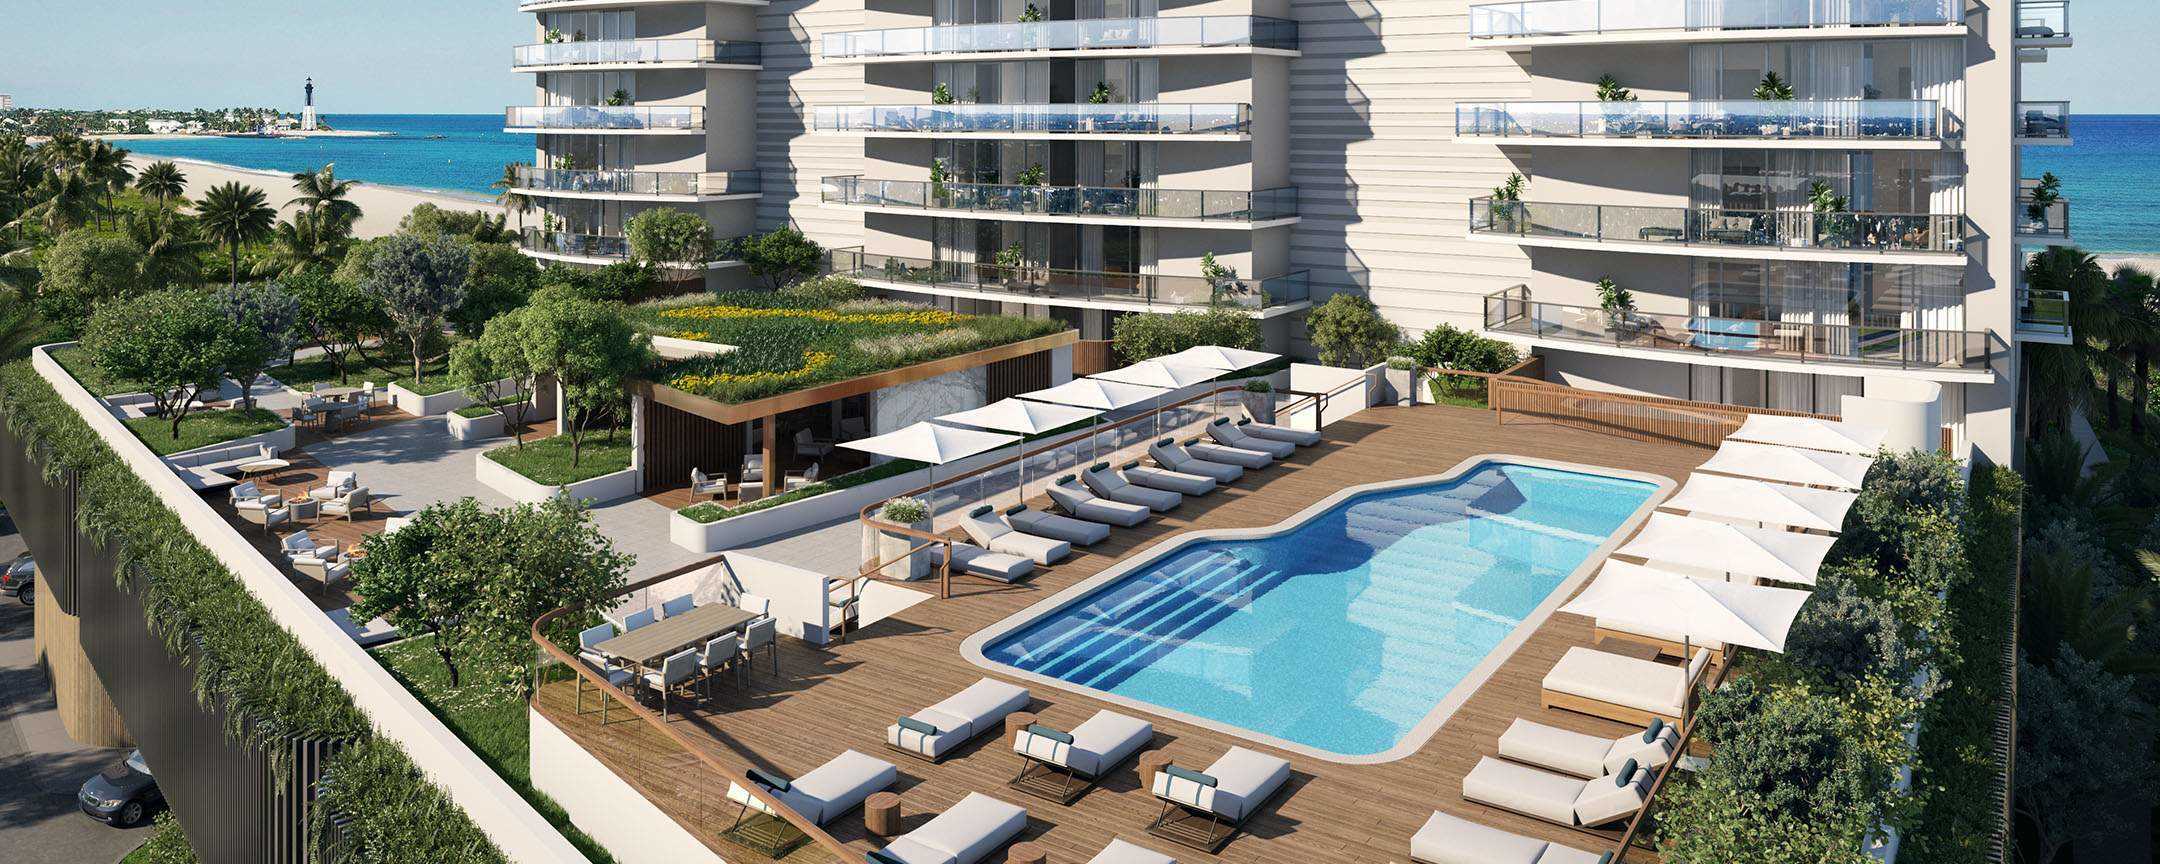 Third floor terrace with pool and garden at Solemar luxury condominiums in Pompano Beach, Florida.